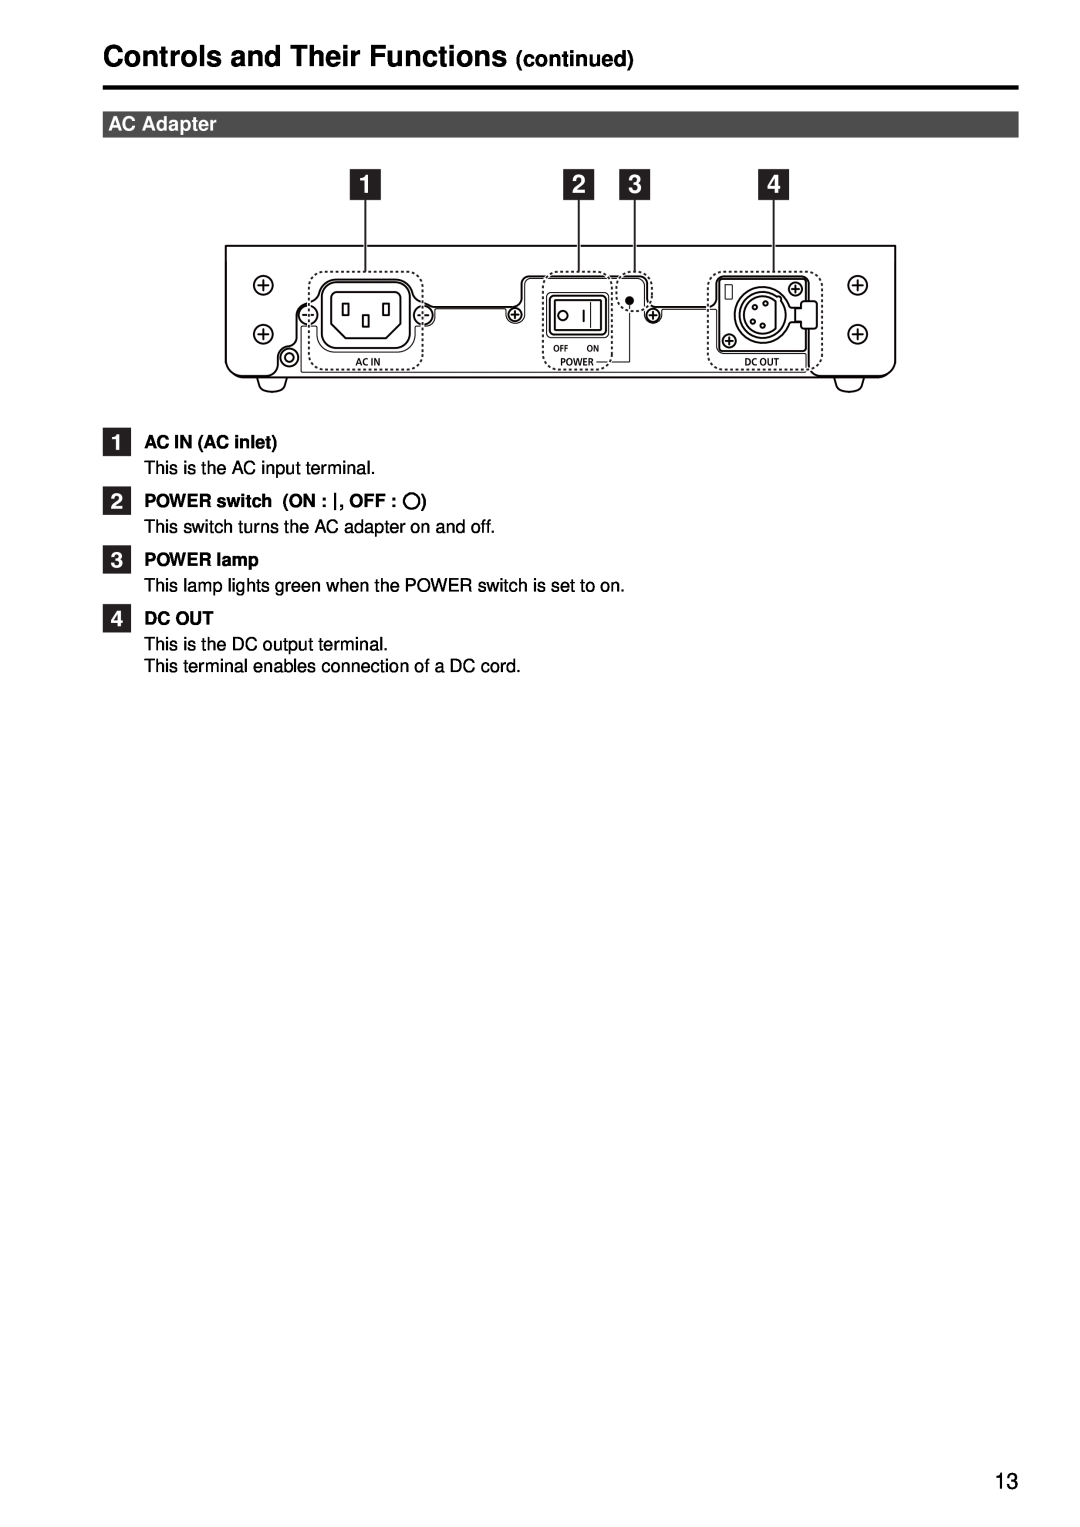 Panasonic BT-LH2550P AC Adapter, Controls and Their Functions continued, AC IN AC inlet, POWER switch ON , OFF, POWER lamp 